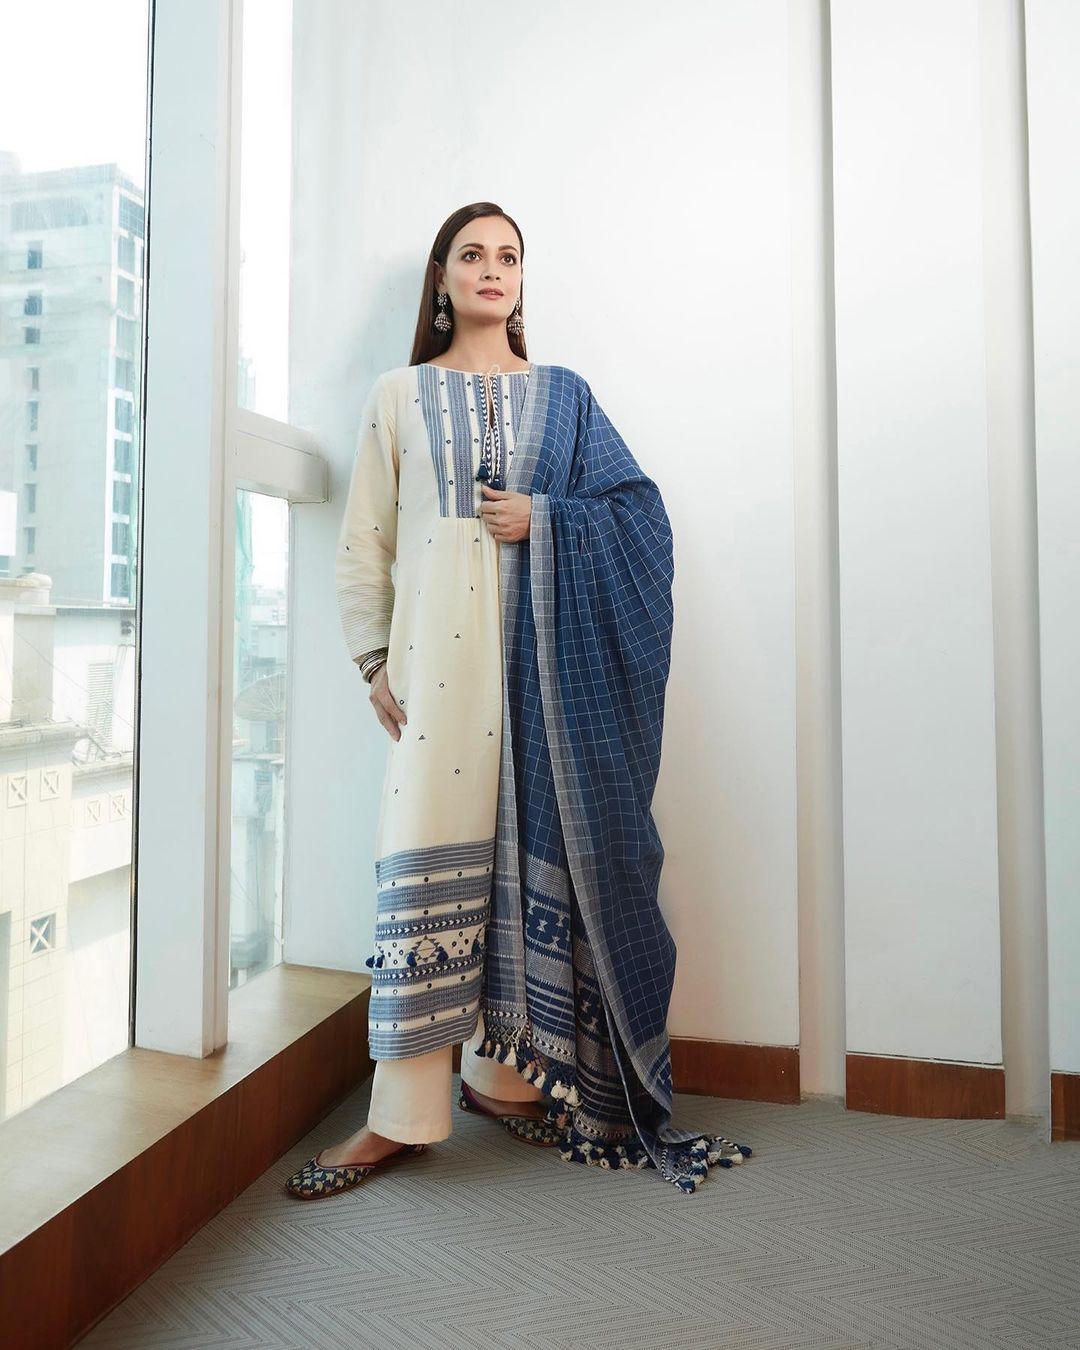 White and blue magic: Dia Mirza promoted her film Bheed earlier this year wearing this beautiful handcrafted Anita Dongre outfit. The Bhujodi weave is a time-honoured technique displayed beautifully on the Soha kurta set. With its intricate thread accents, it's the most elegant way to enhance your celebrations. And it has pockets.